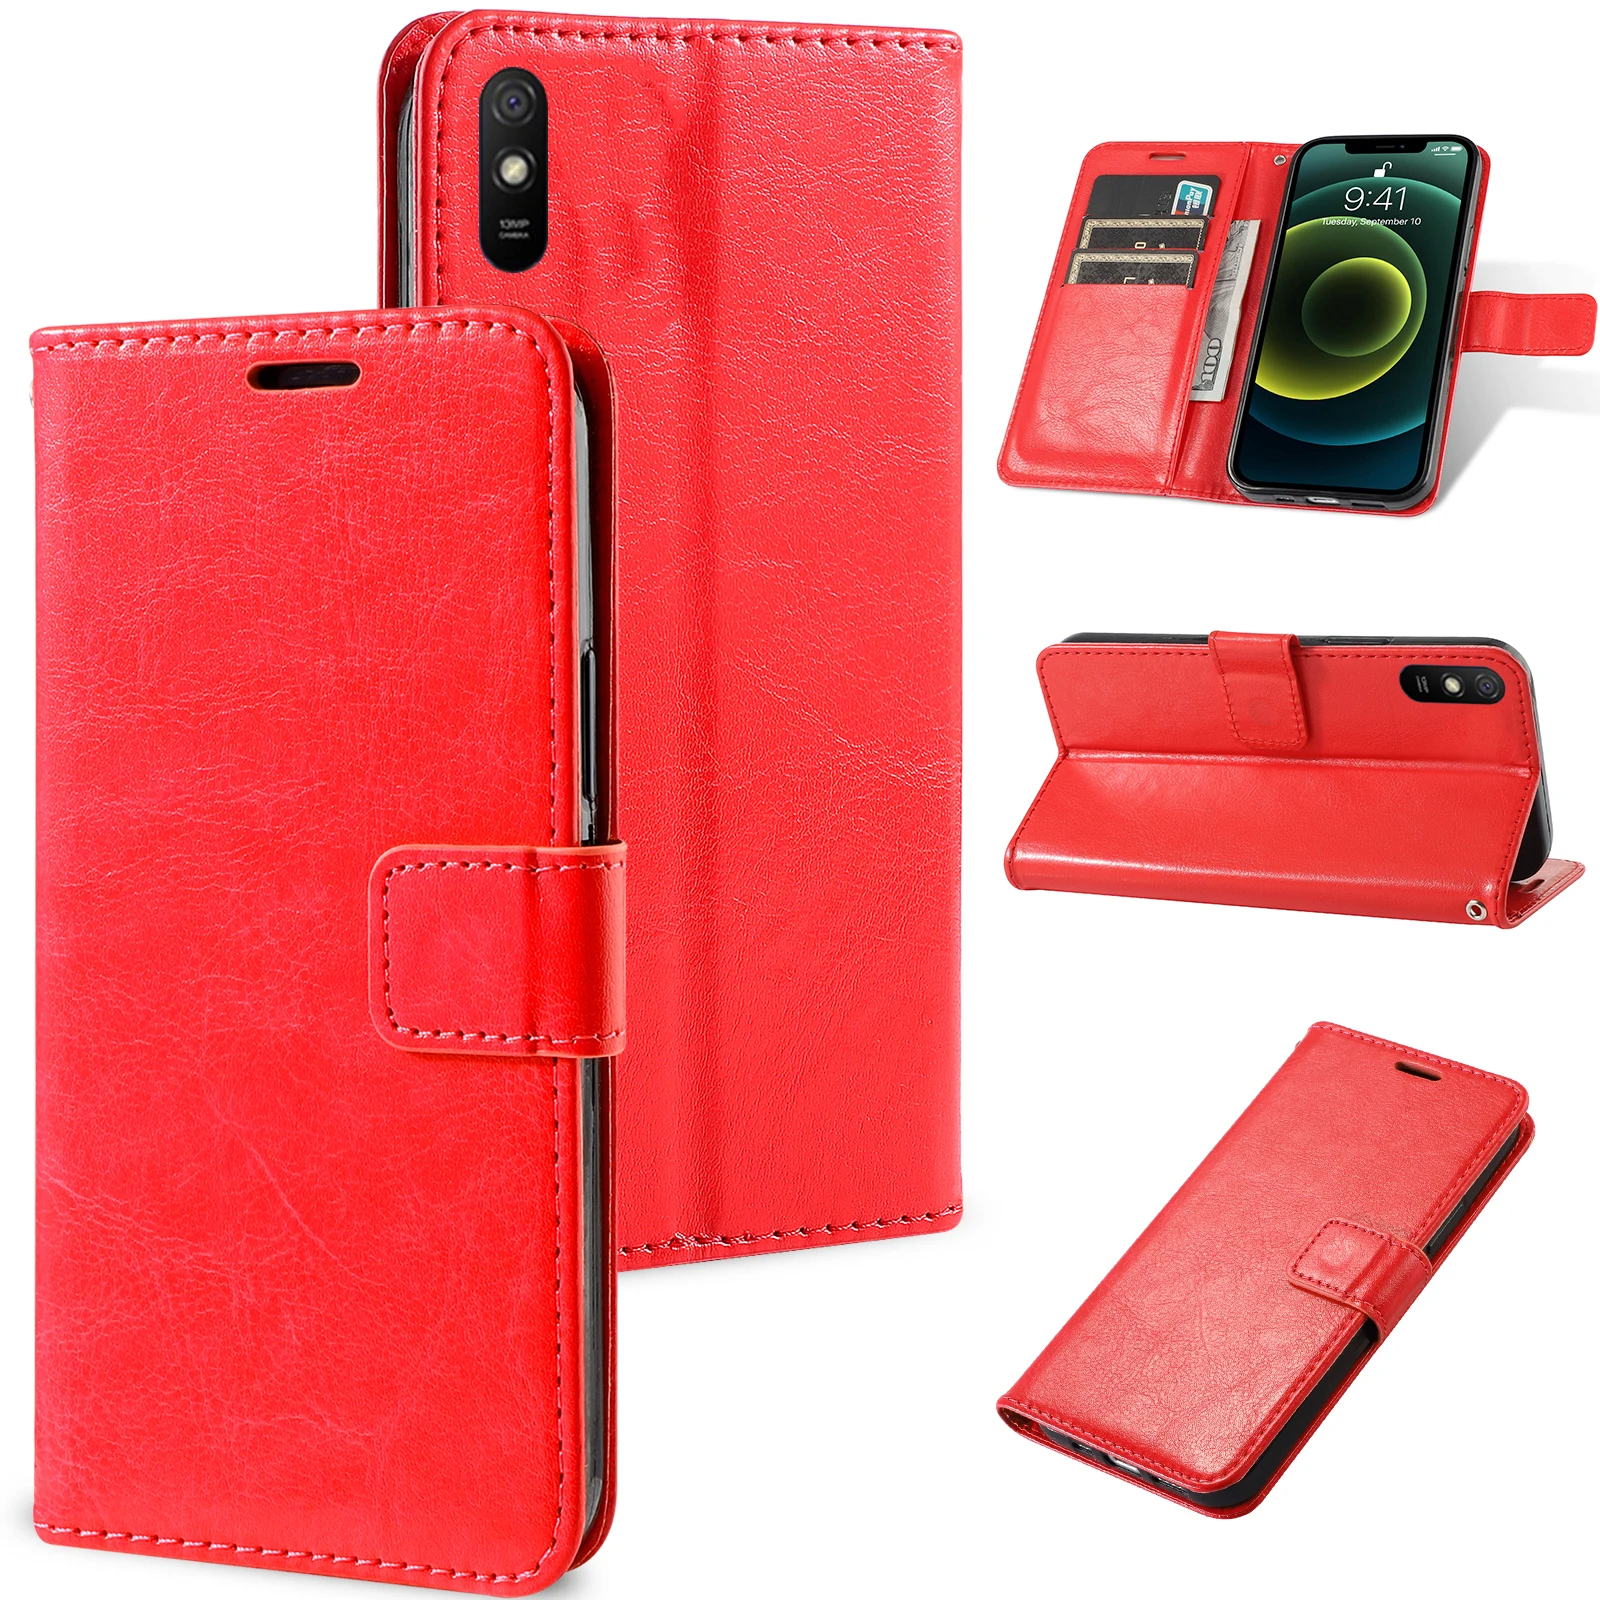 

Wallet Cover For Xiaomi Redmi Note 7 7S 7A 6 5 4 3 8 8A 8T 6A 5A 4A 4X 3S K20 Pro SE Plus case Flip Magnetic Cover Phone Leather